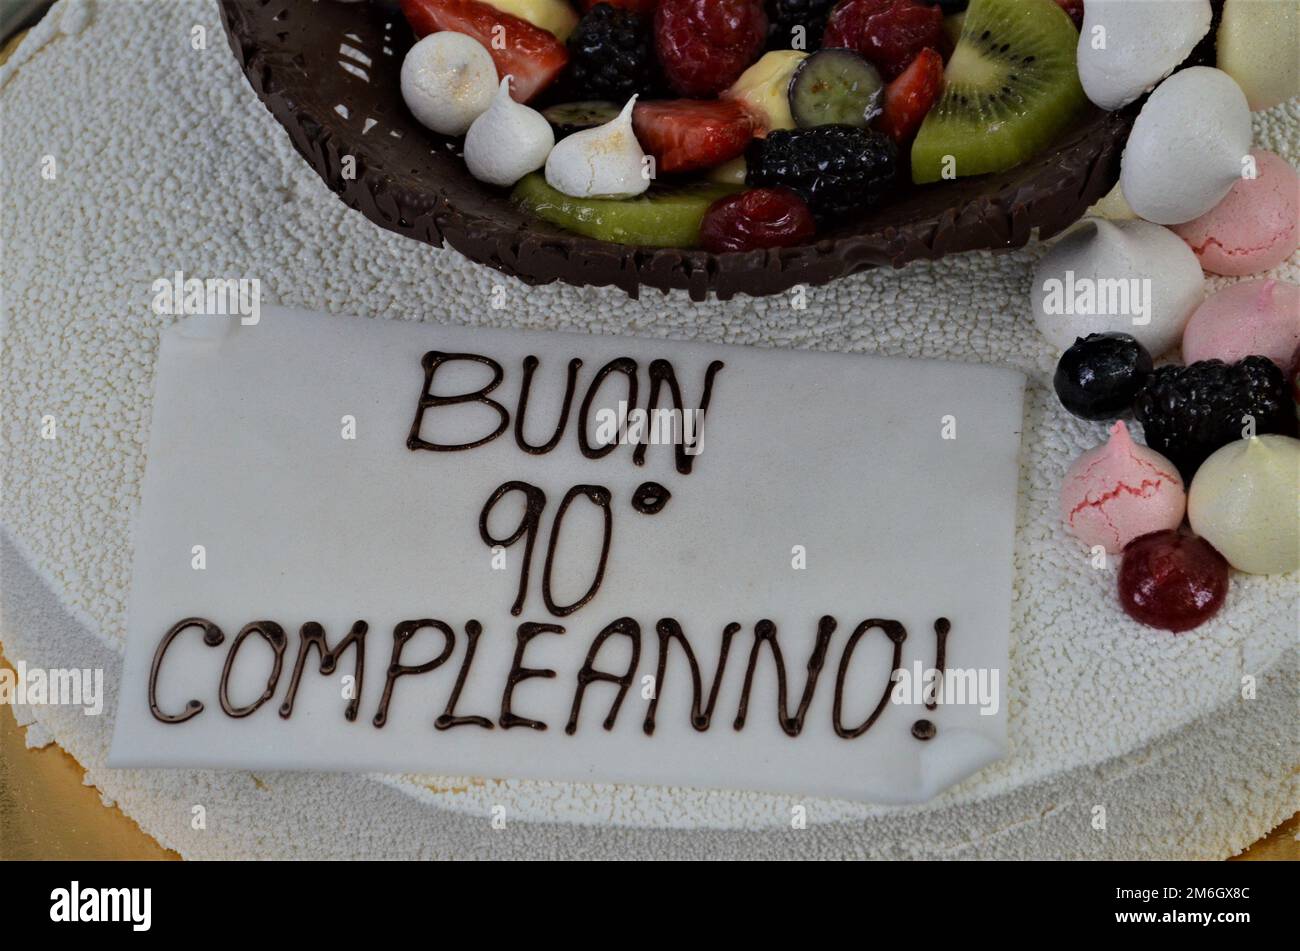 VICENZA, Italy - Detail of the cake presented to Meri Mion, 89, the guest of honor at the event, held at Giardini Salvi, very close to where the 88th Infantry Division fought its way into the city on April 28, 1945.    Soldiers from U.S. Army Garrison Italy returned a birthday cake to her 77 years after American troops fighting near Vicenza ate the cake made for her thirteenth birthday. Stock Photo